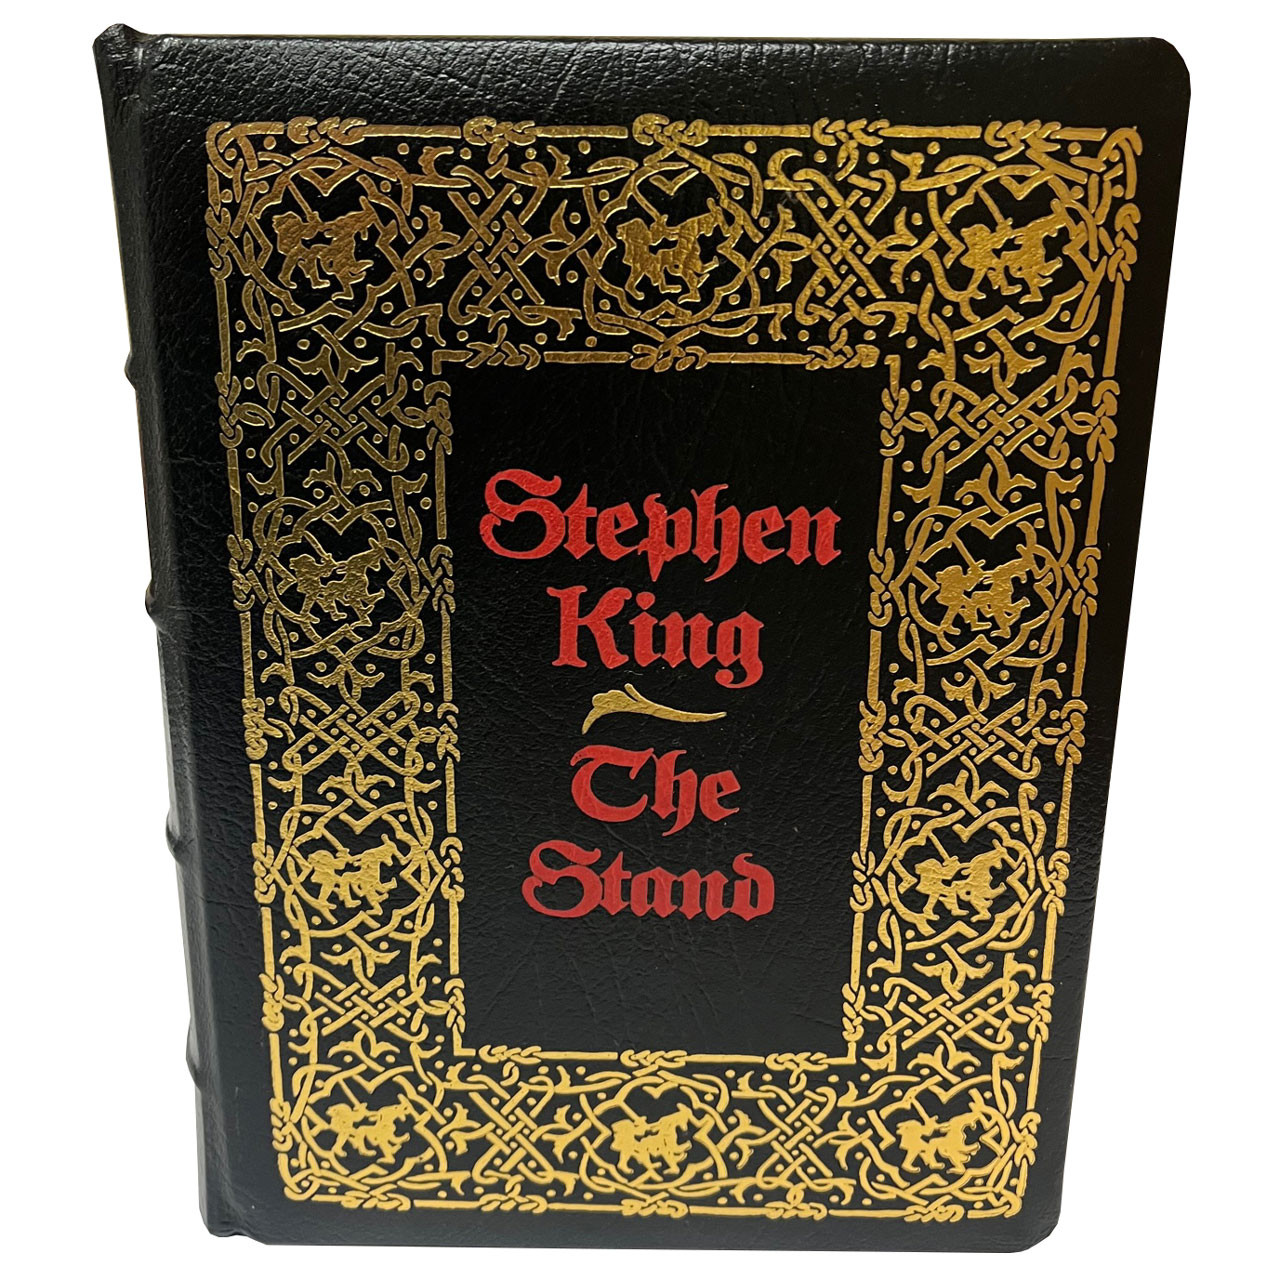 Stephen King "The Stand: The Complete and Uncut Edition" Signed Limited First Edition, Deluxe Leather Bound "Coffin" Bible No. 481 of 1,250